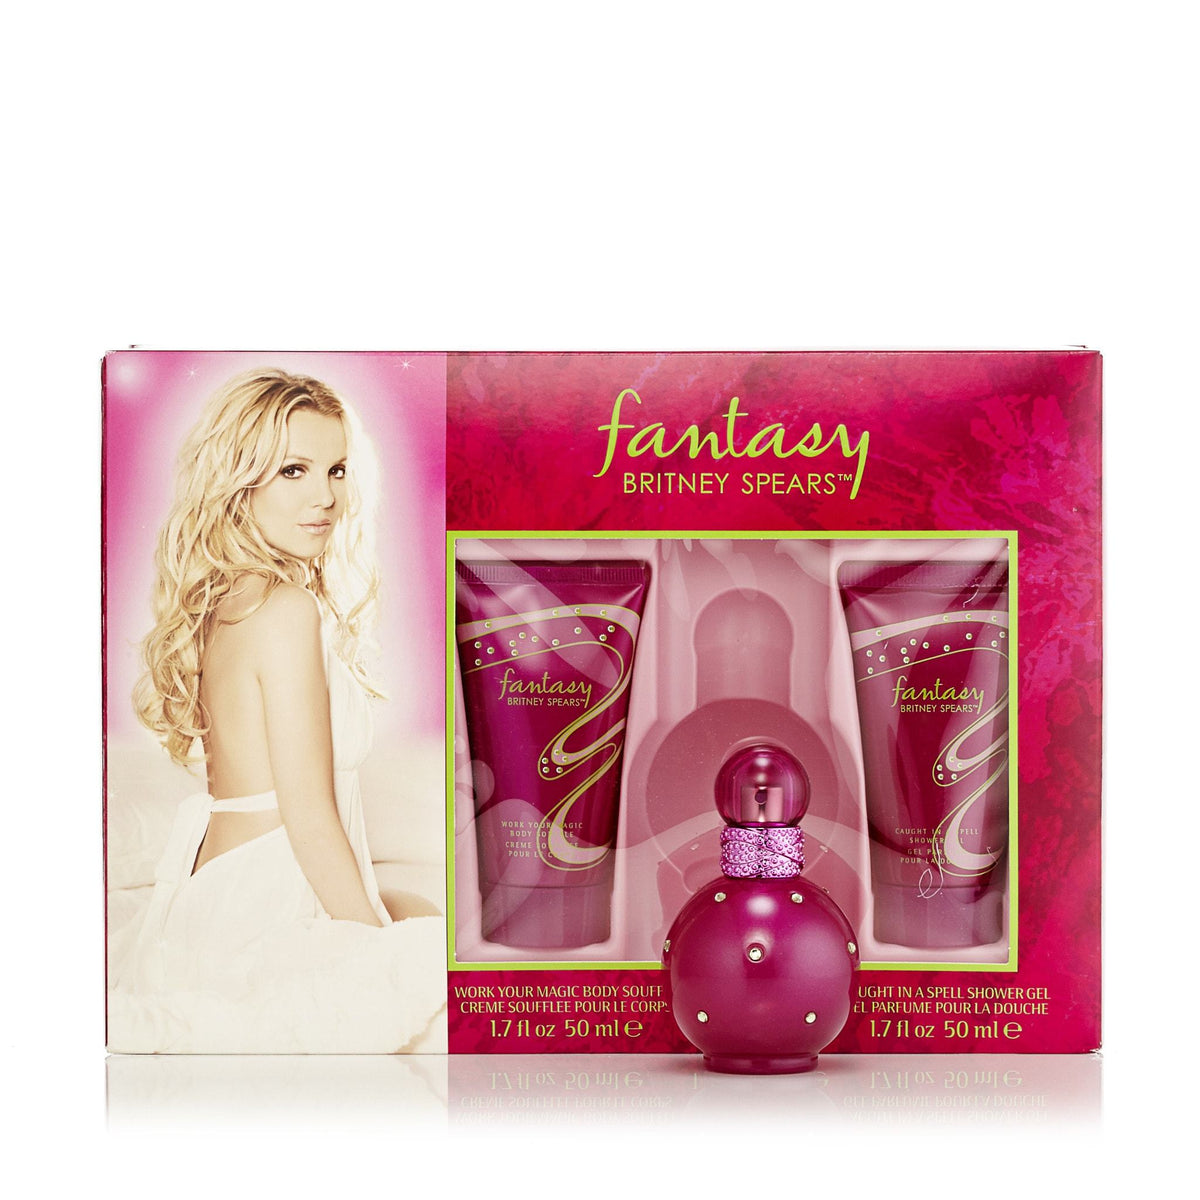 Fantasy Gift Set EDP, Body Lotion and Shower Gel for Women by Britney Spears 1.0 oz.